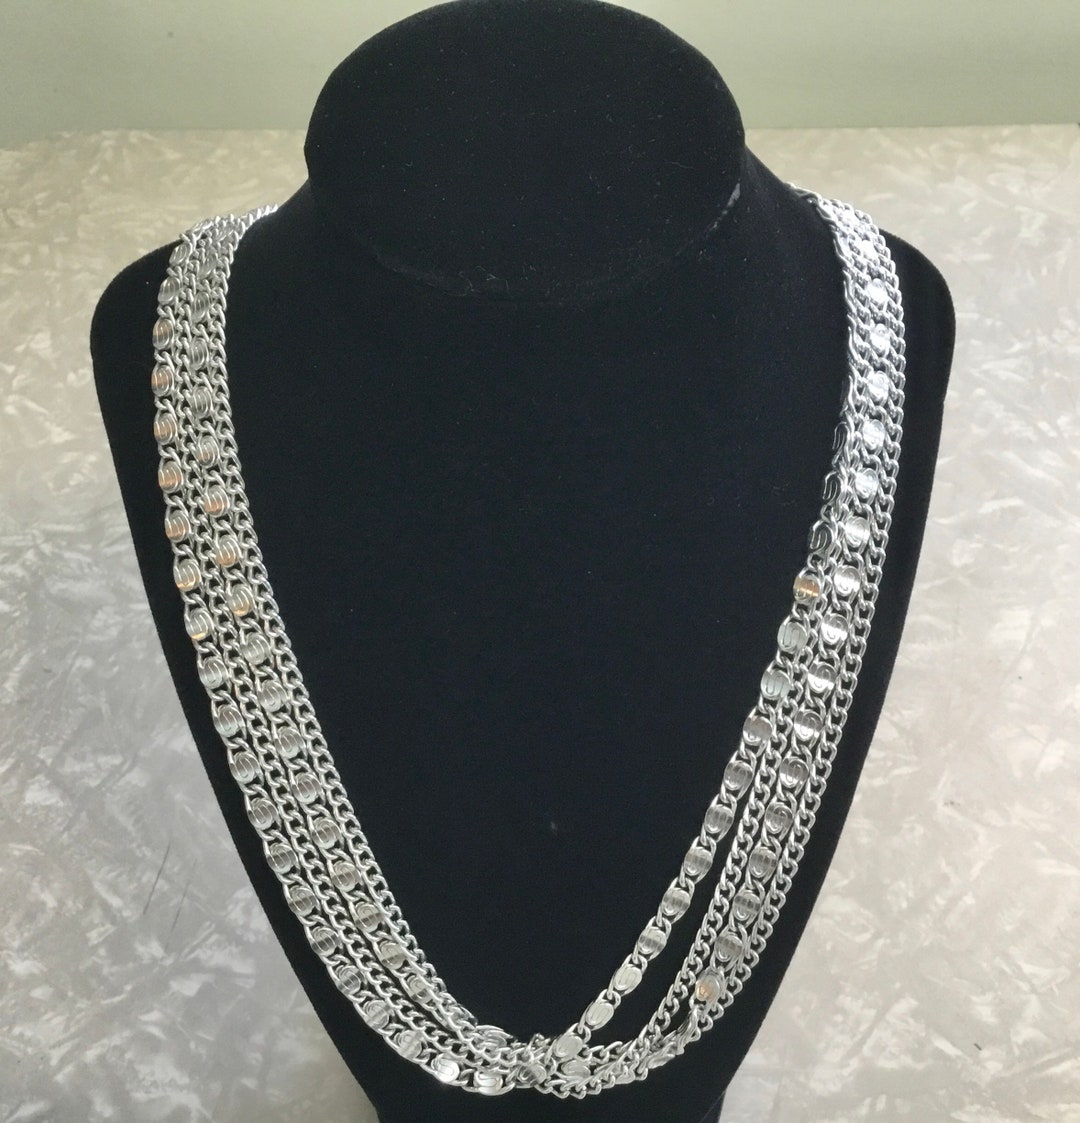 25 Inch Aluminum Chain Necklace, Four Strand, Sarah Coventry, 1960s - Etsy